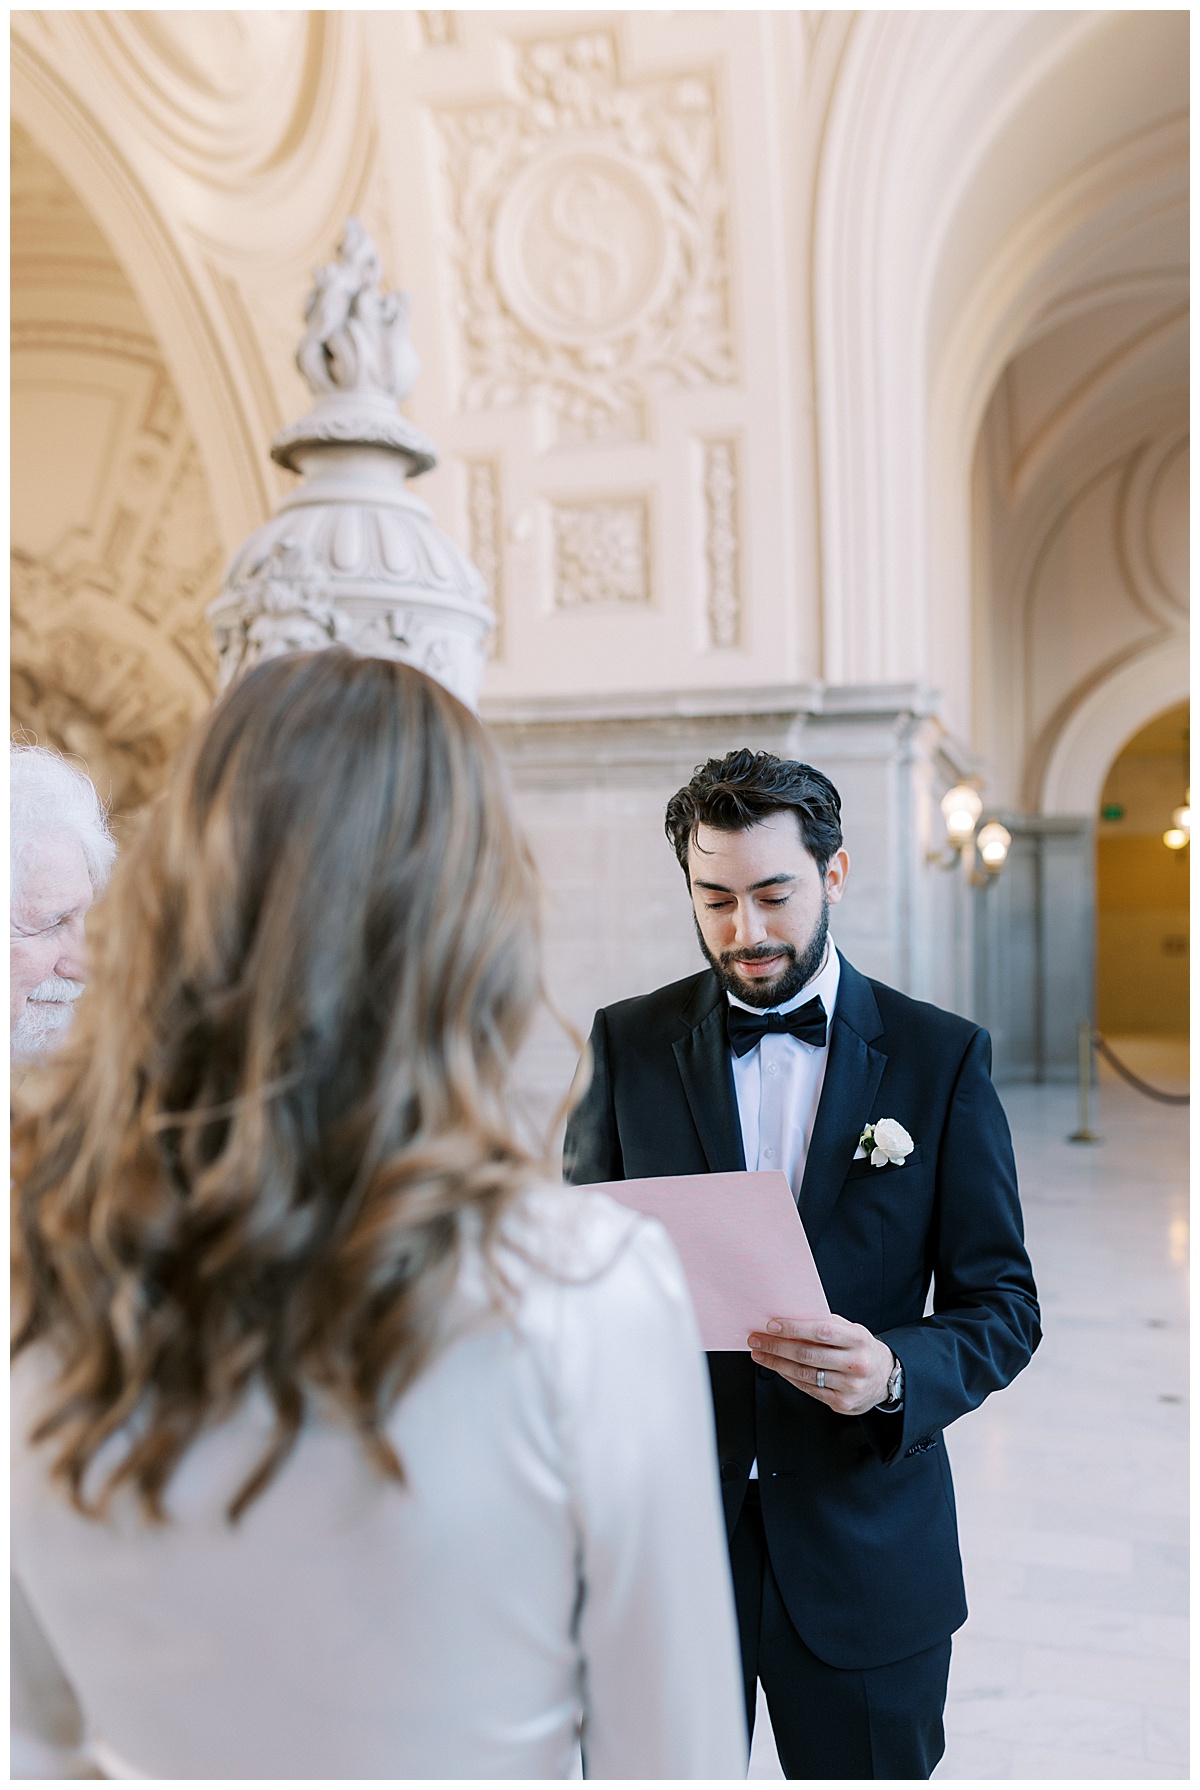 Guilherme reading his wedding vows